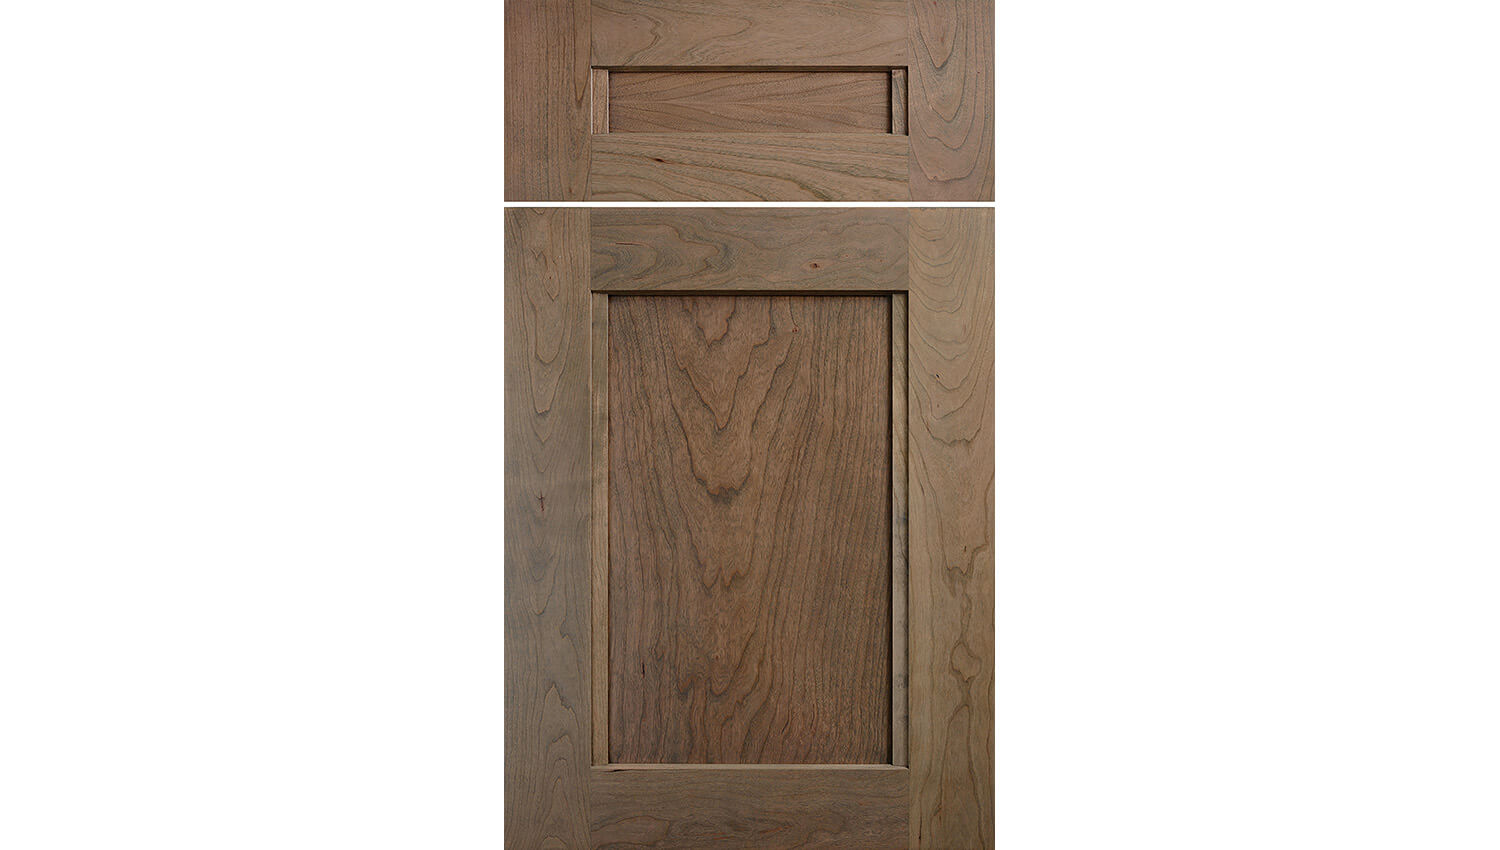 A modern flat panel door style with vertical details.